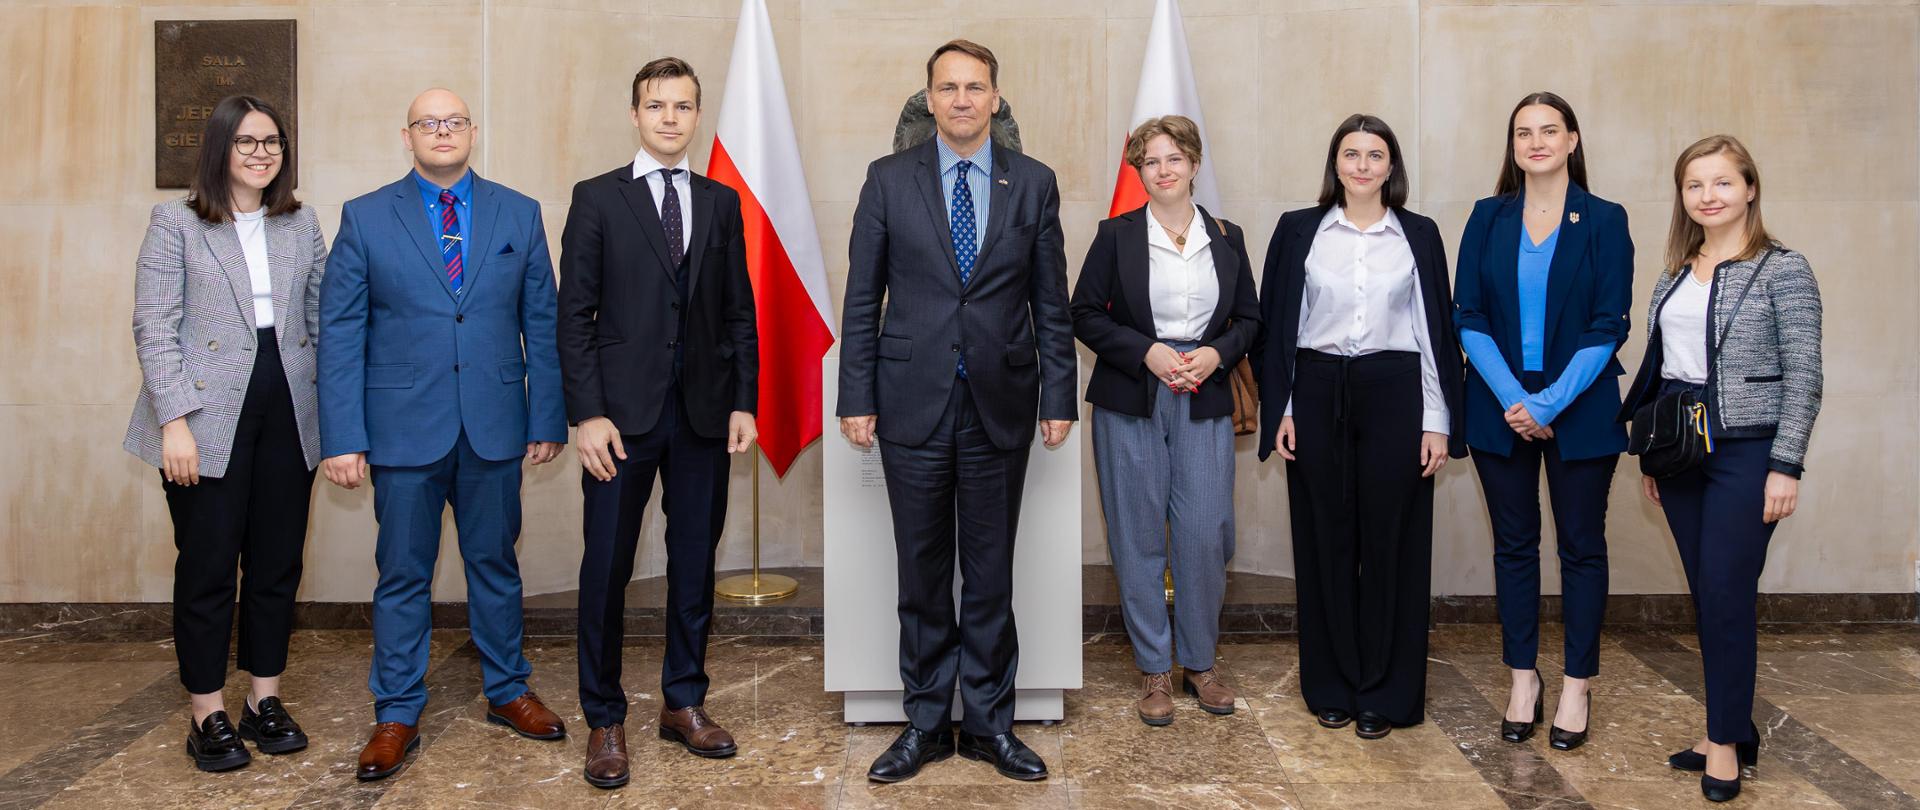 Minister Radosław Sikorski attends meeting with Ukrainian students of College of Europe in Natolin